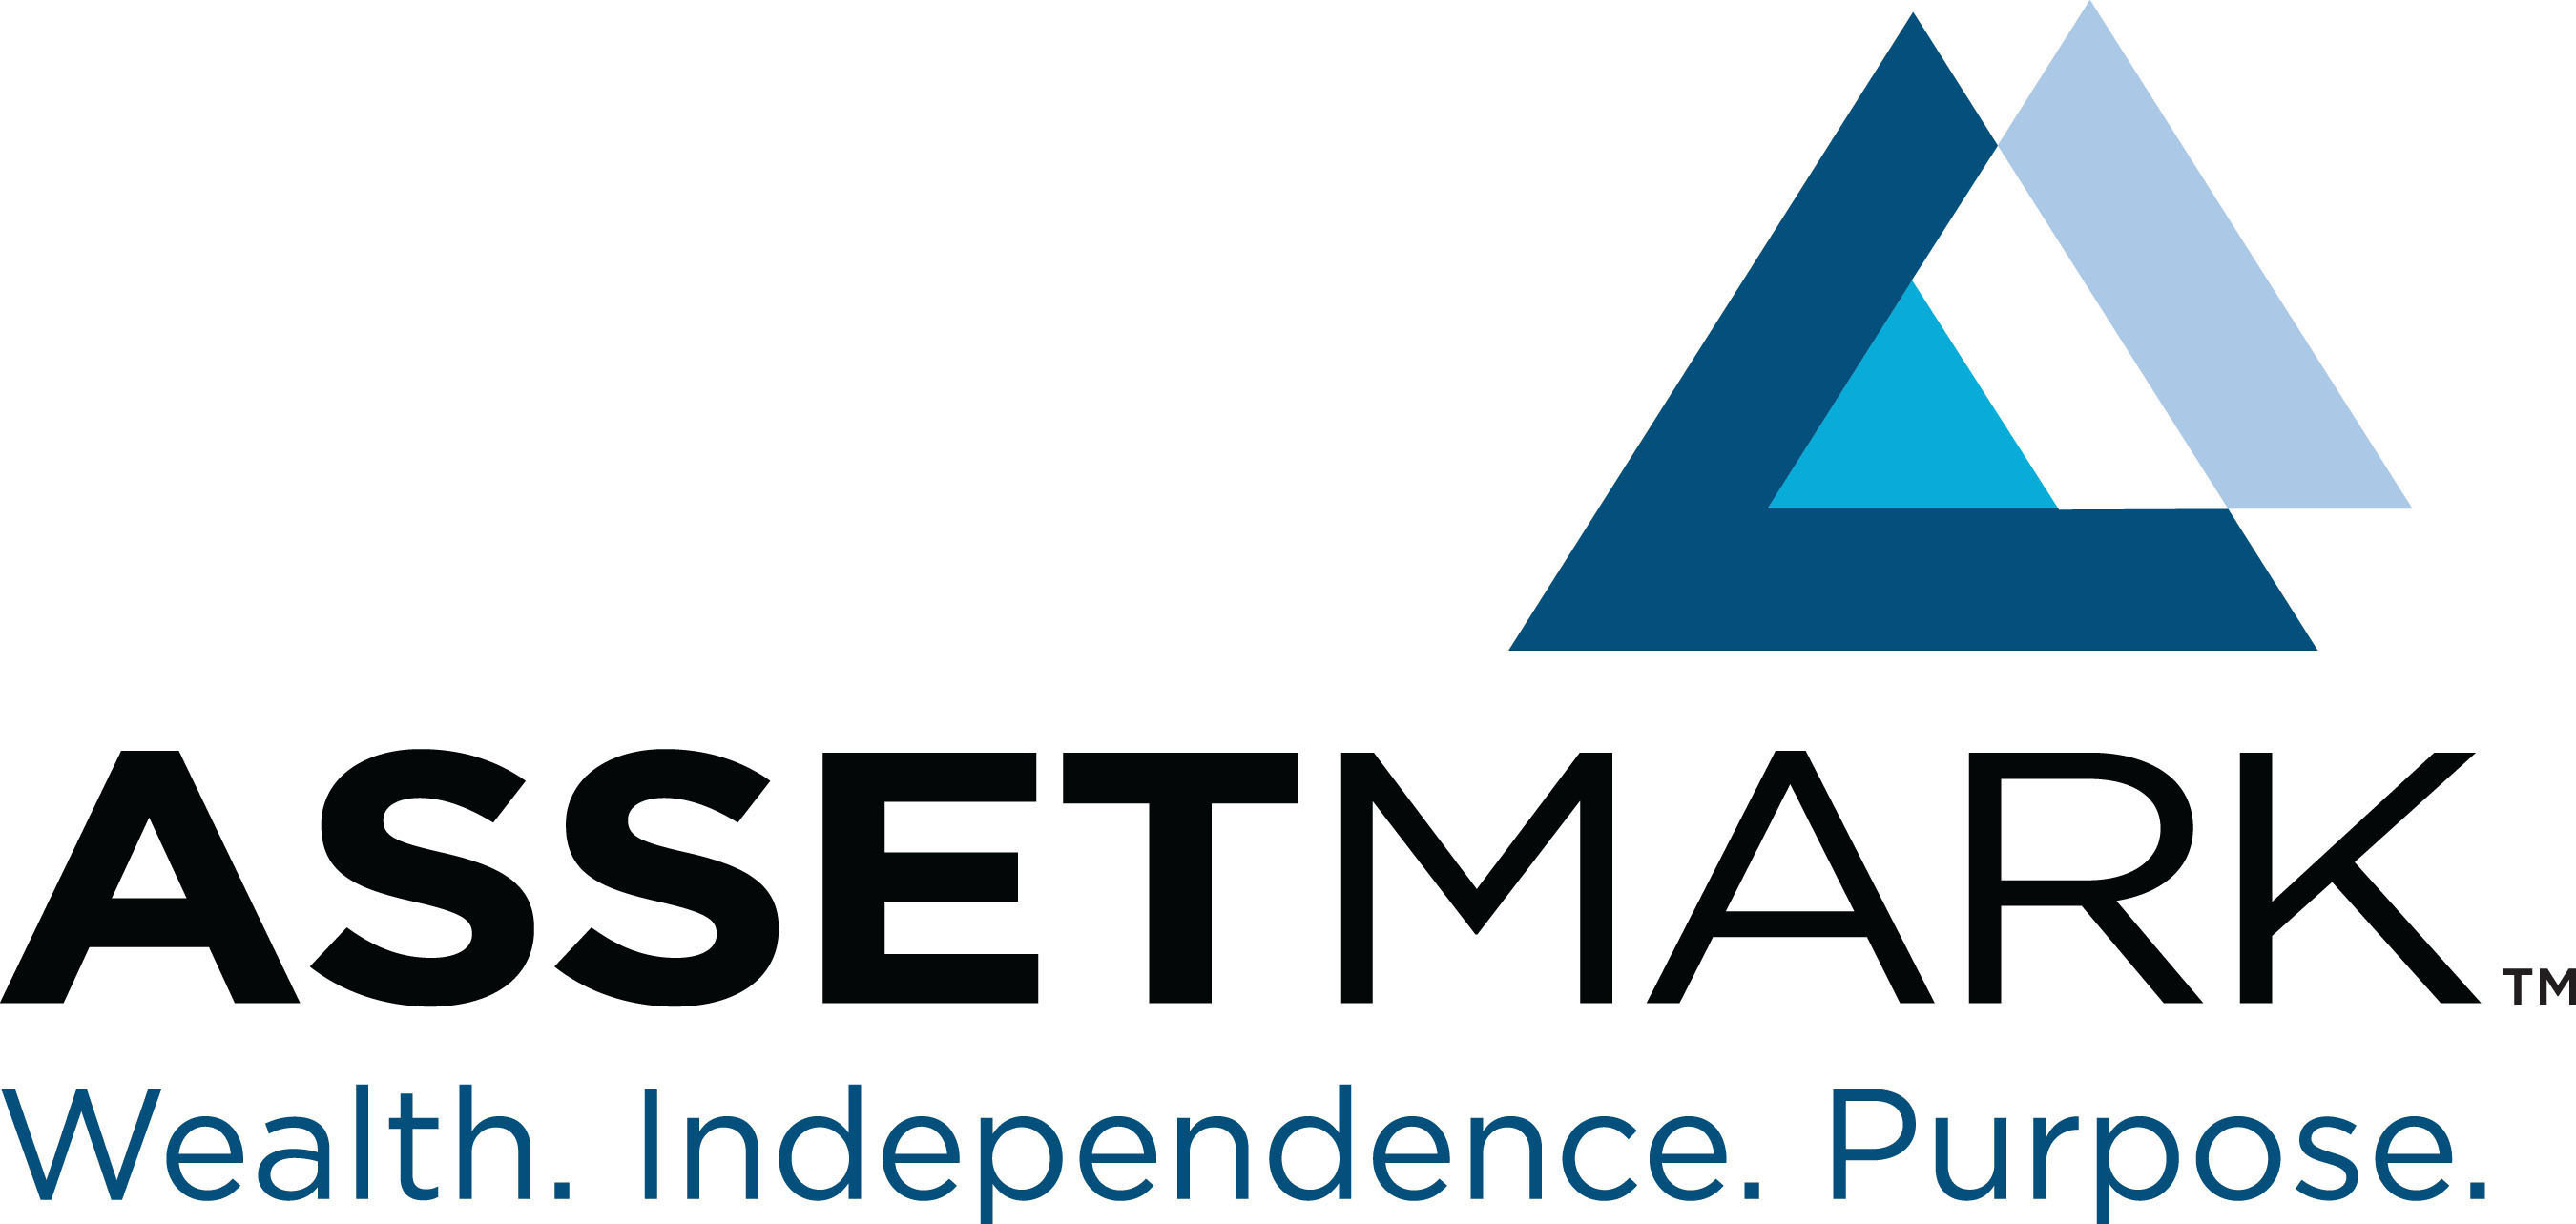 AssetMark - Wealth. Independence. Purpose. A leading strategic provider of innovative investment and consulting solutions serving financial advisors.